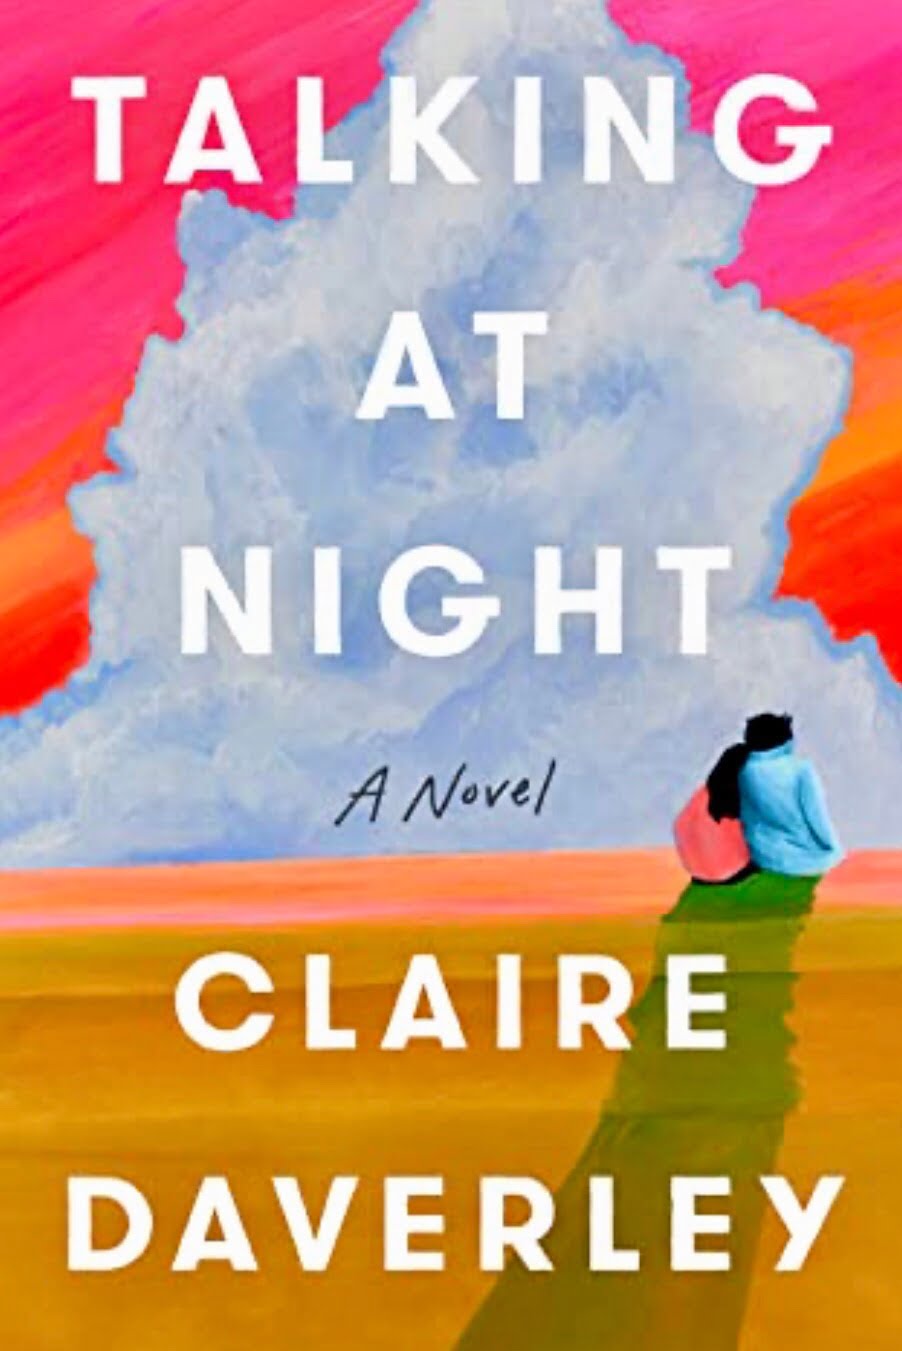 TALKING AT NIGHT BY CLAIRE DAVERLEY – BOOK REVIEW